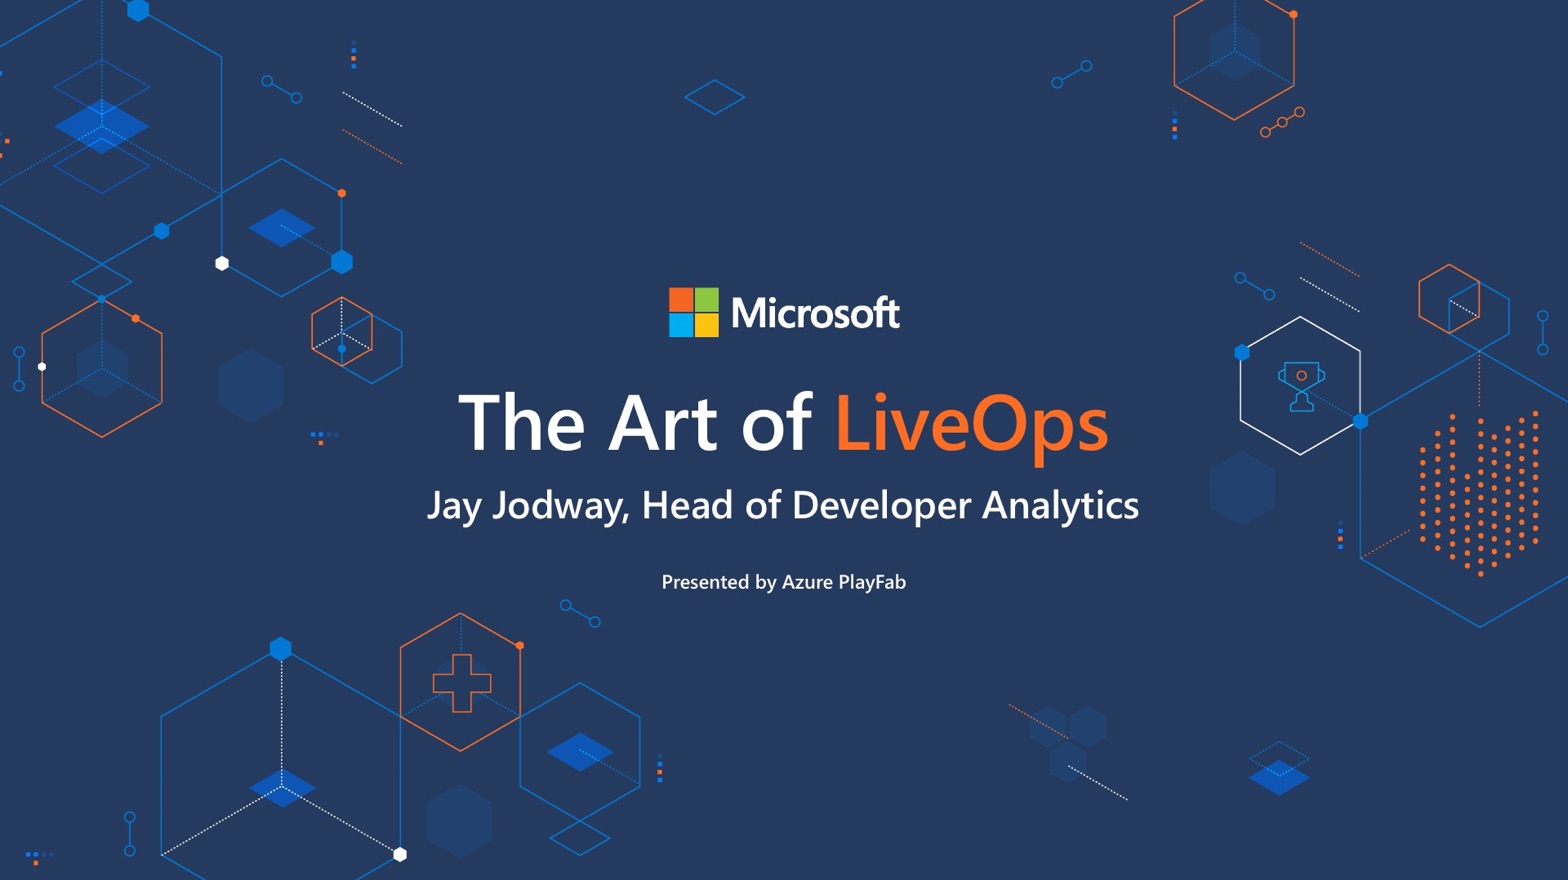 Hero image for The Art of LiveOps post featuring Jay Jodway